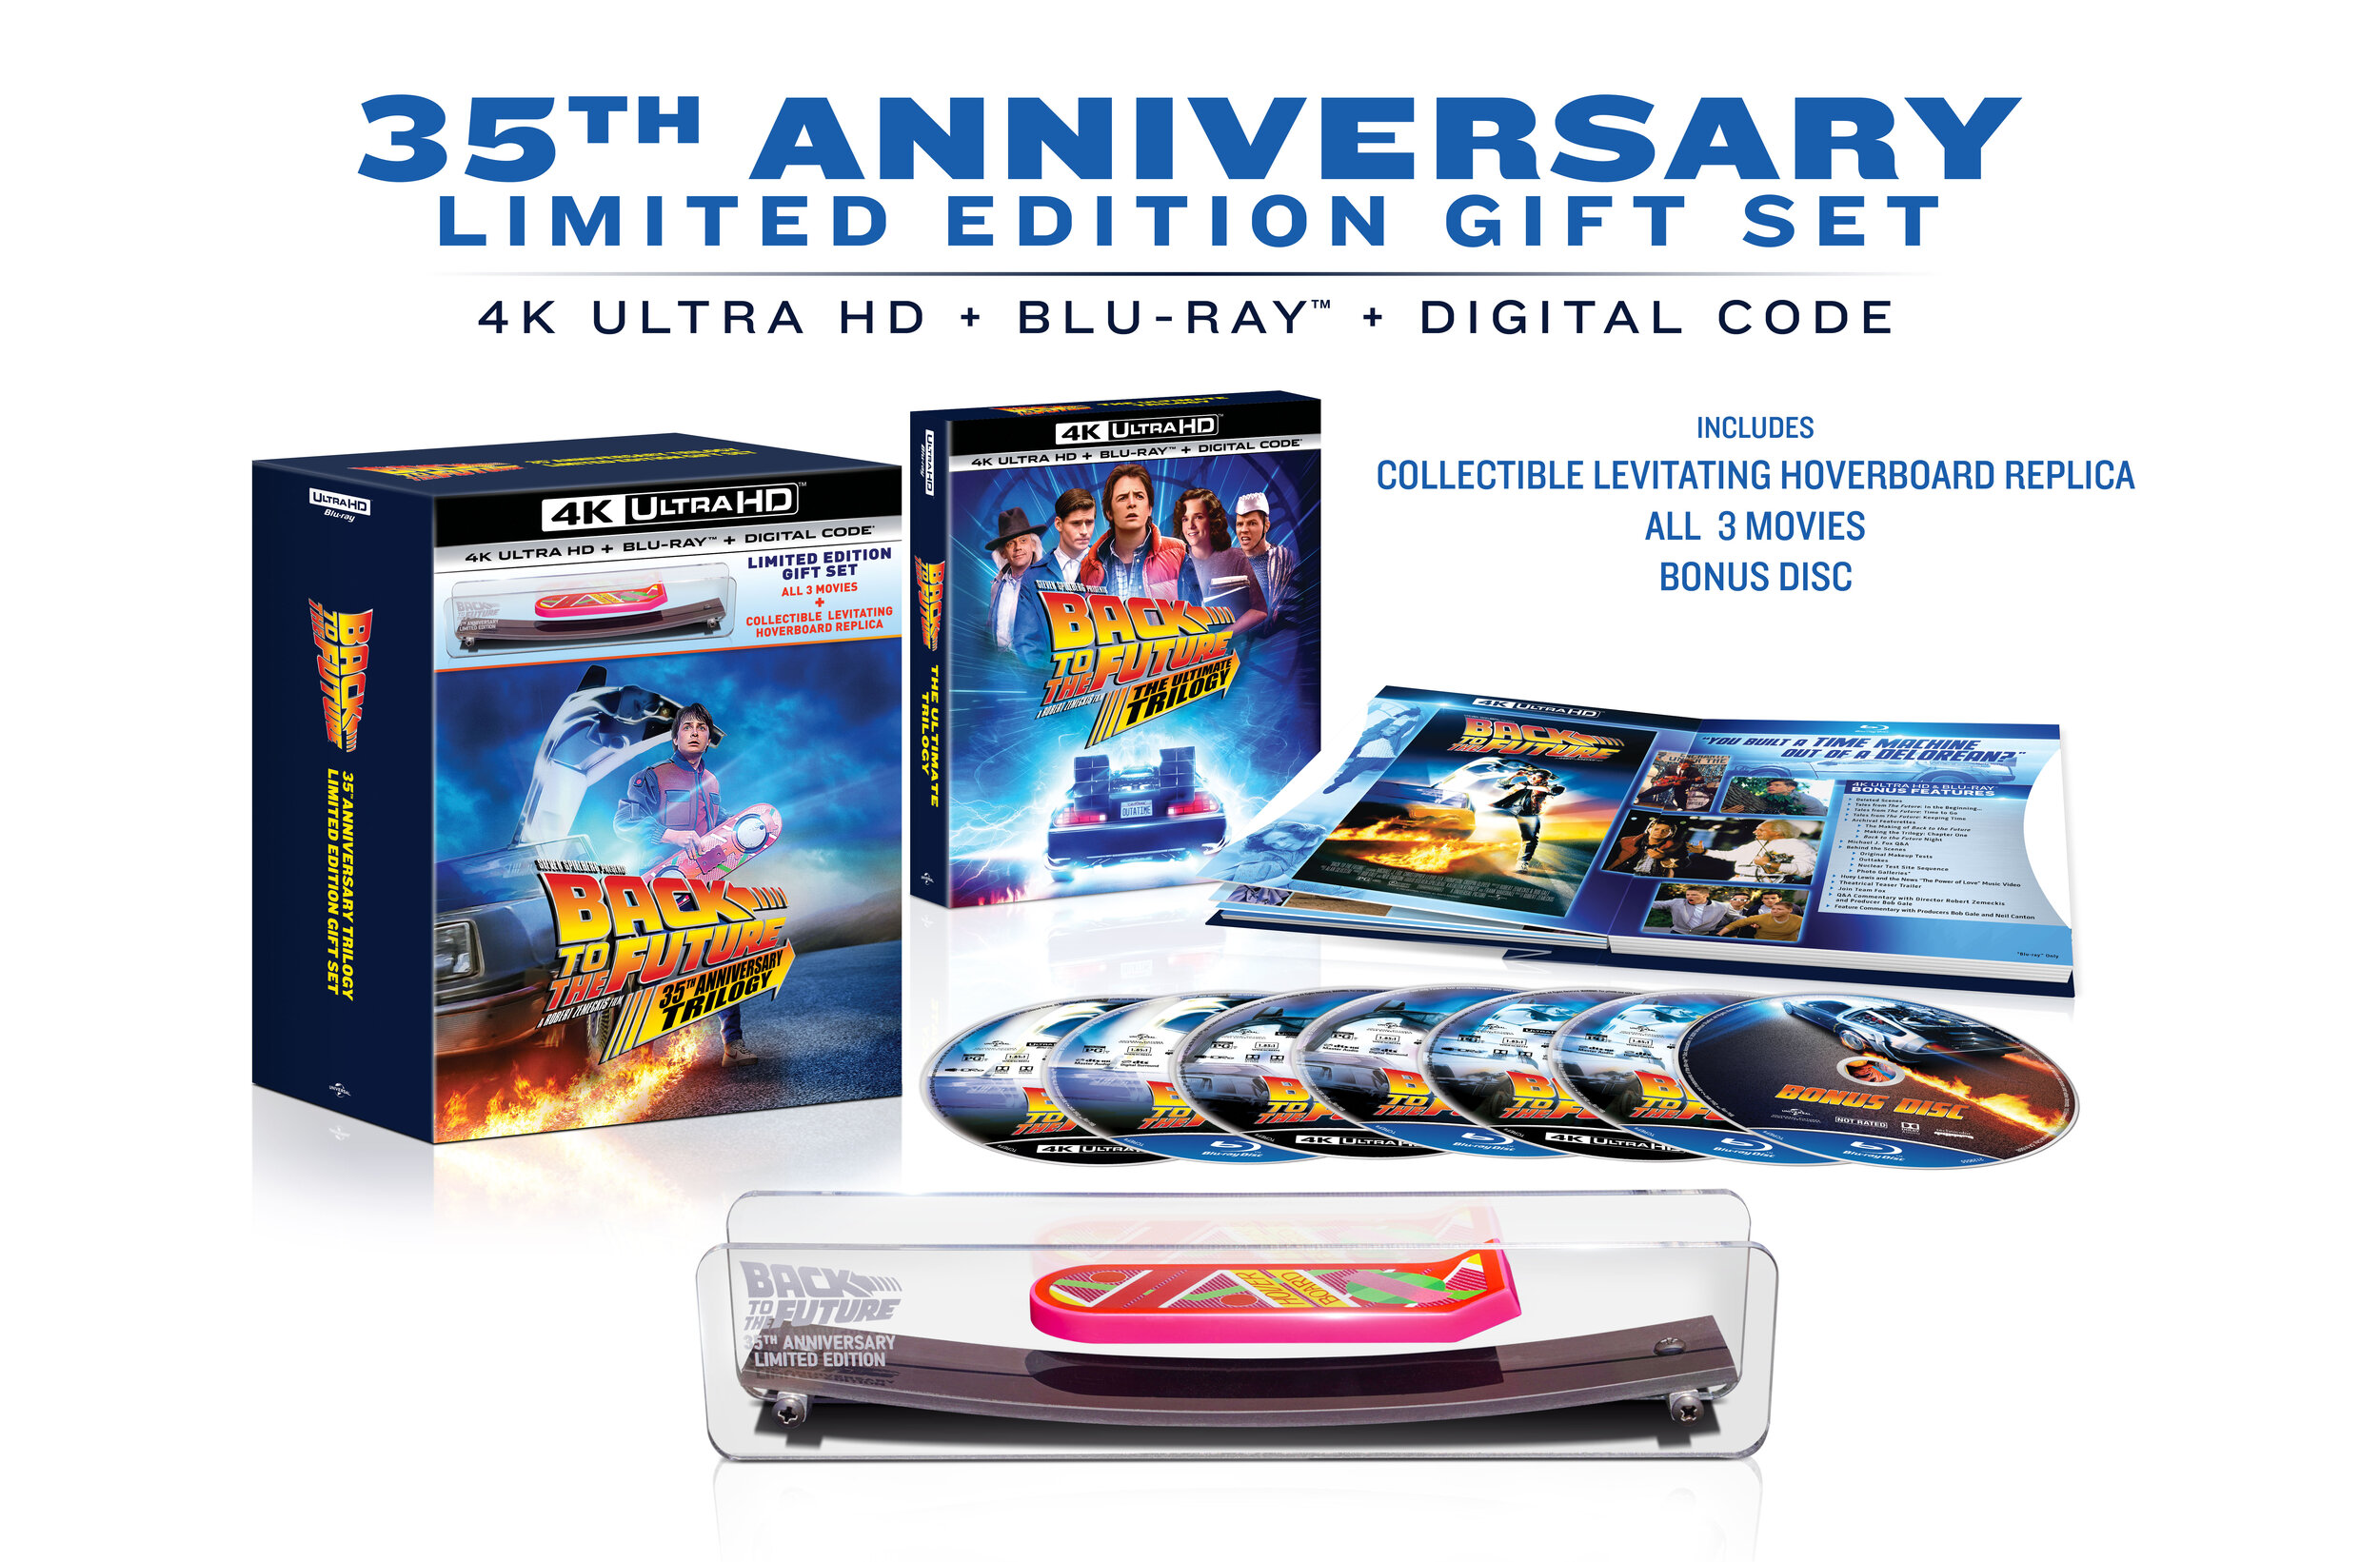 Back to the Future: 35th Anniversary Trilogy Limited Edition Gift Set (4K UHD + Blu-ray + Digital + Hoverboard) – Amazon Exclusive